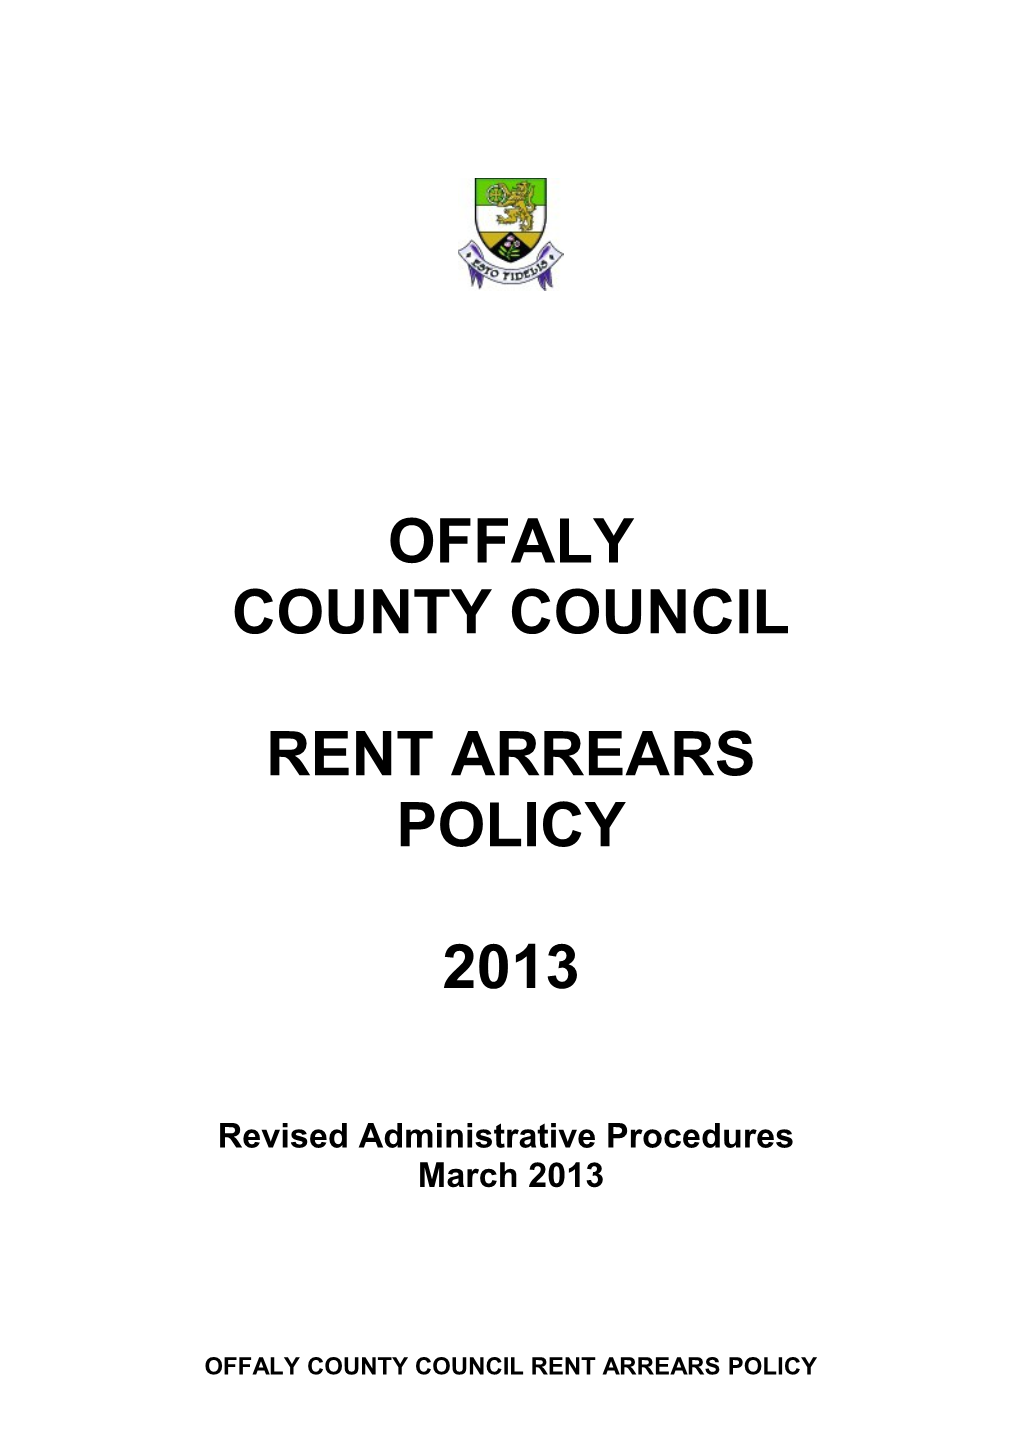 Offaly County Council Rent Arrears Policy